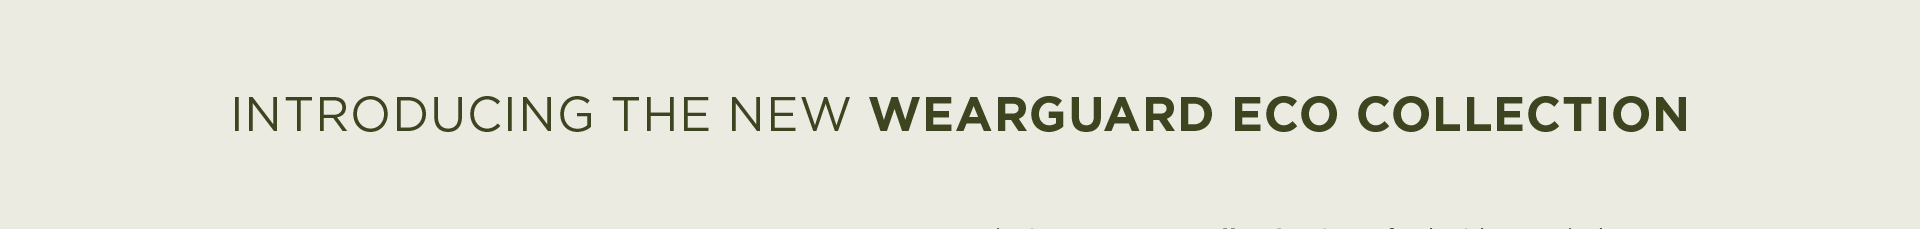 Introducing the new WearGuard Eco Collection.